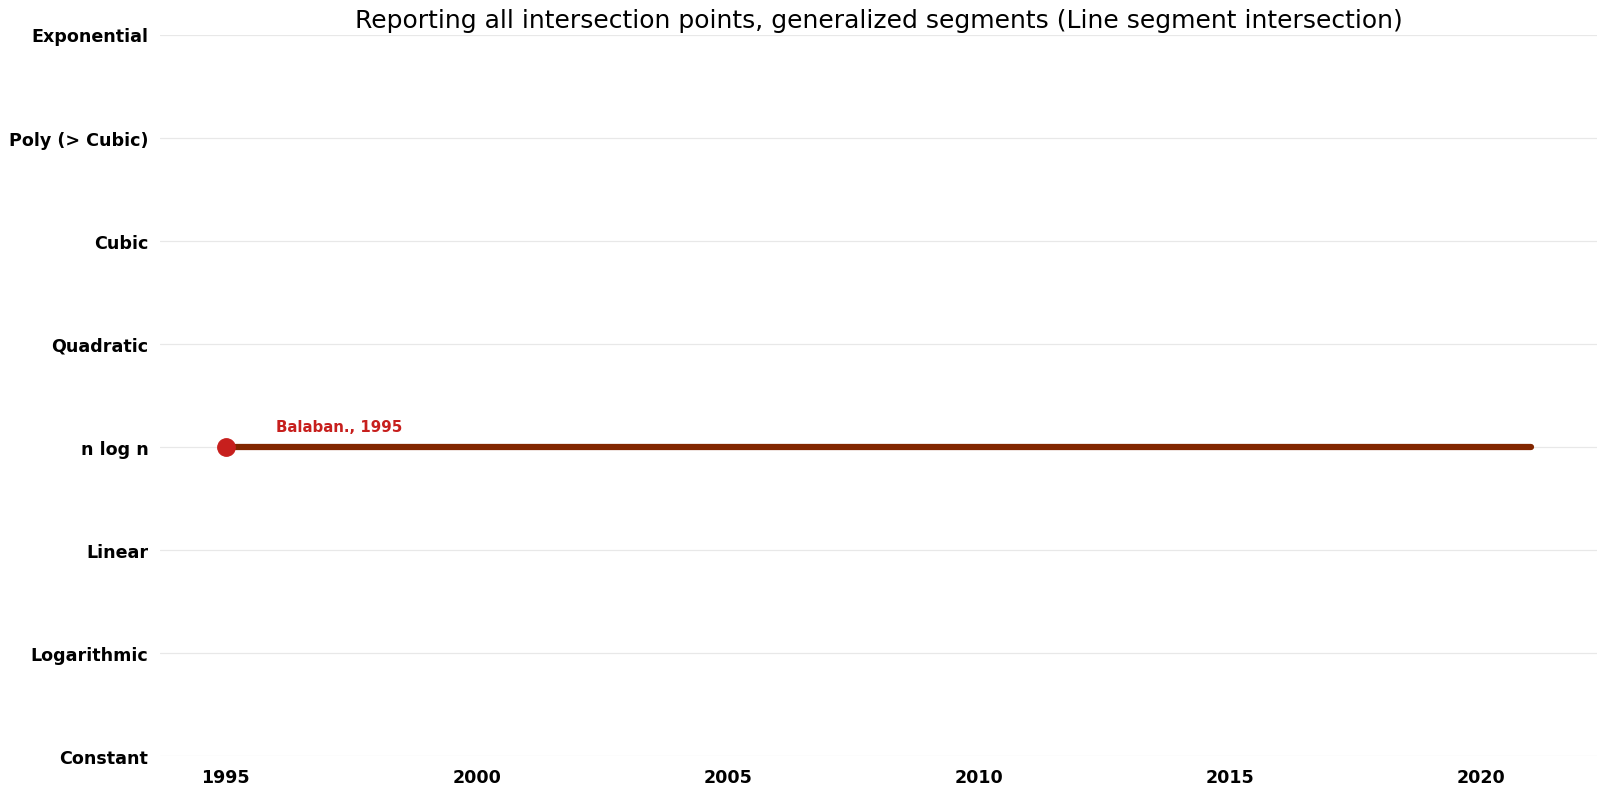 Line segment intersection - Reporting all intersection points, generalized segments - Time.png